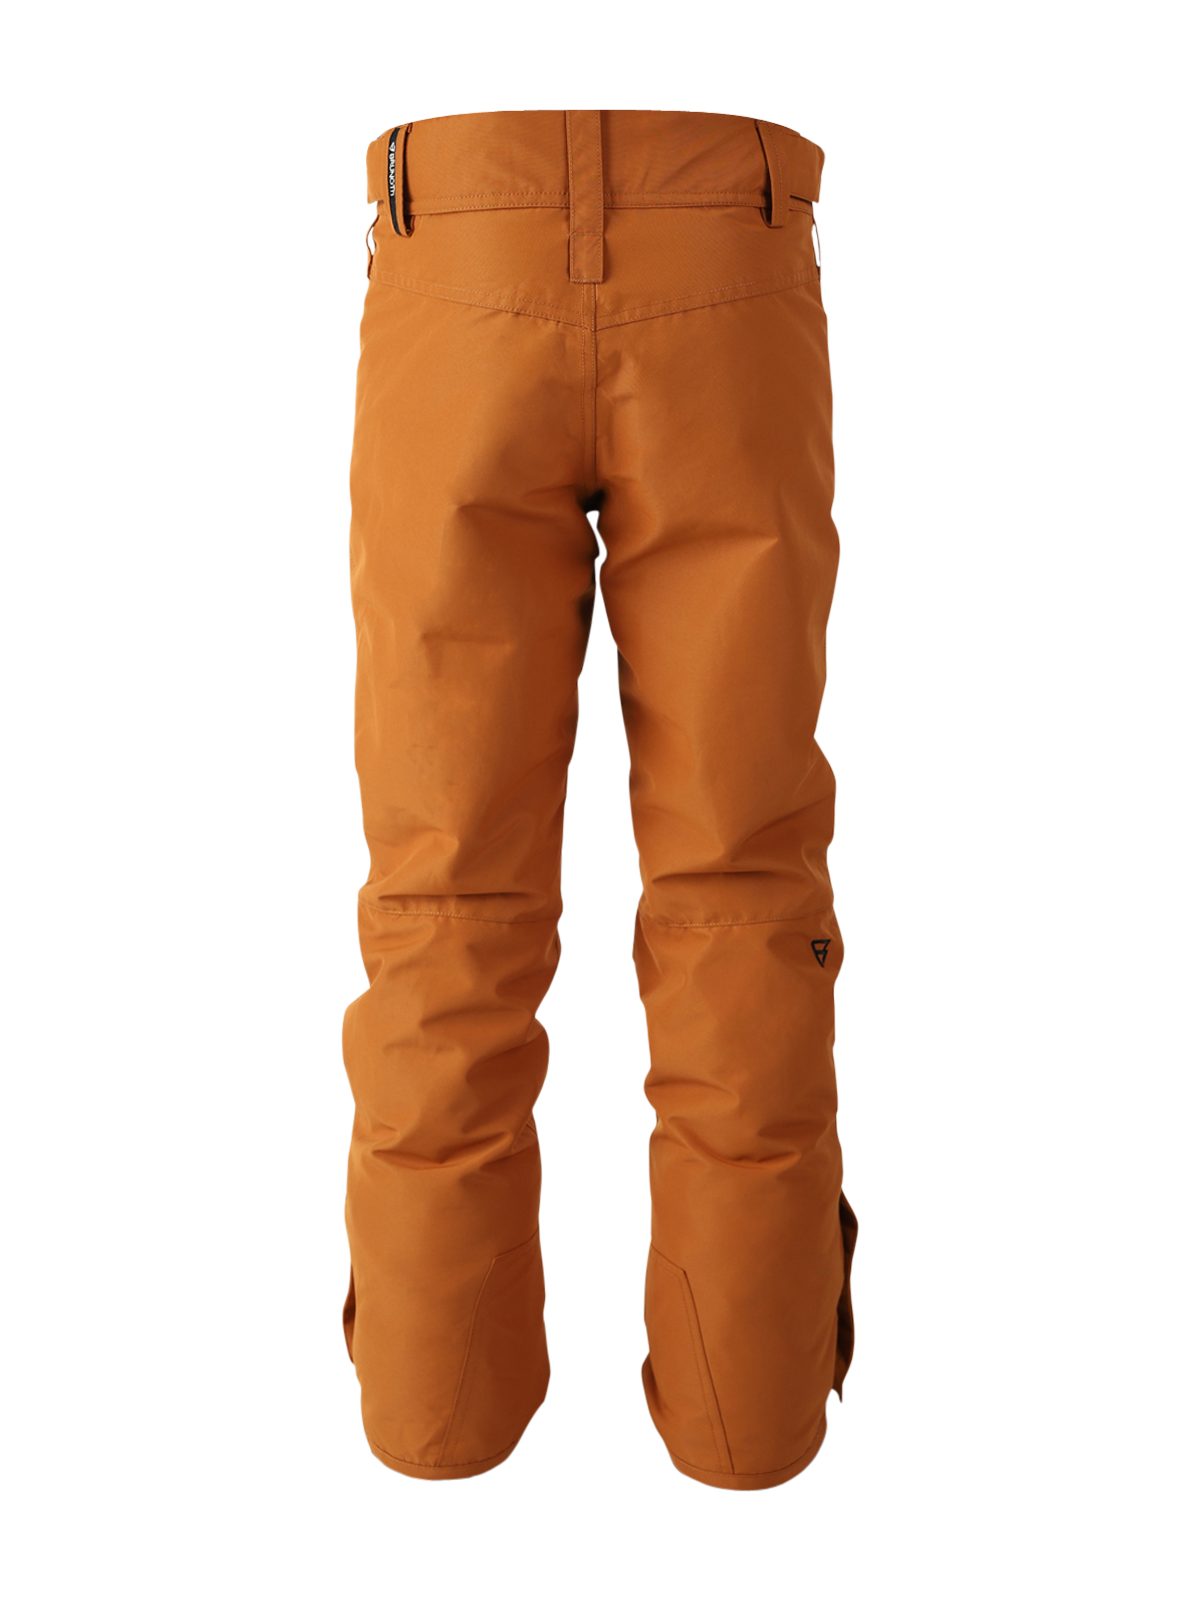 Footraily Boys Snow Skihose Brunotti TABACCO Pant